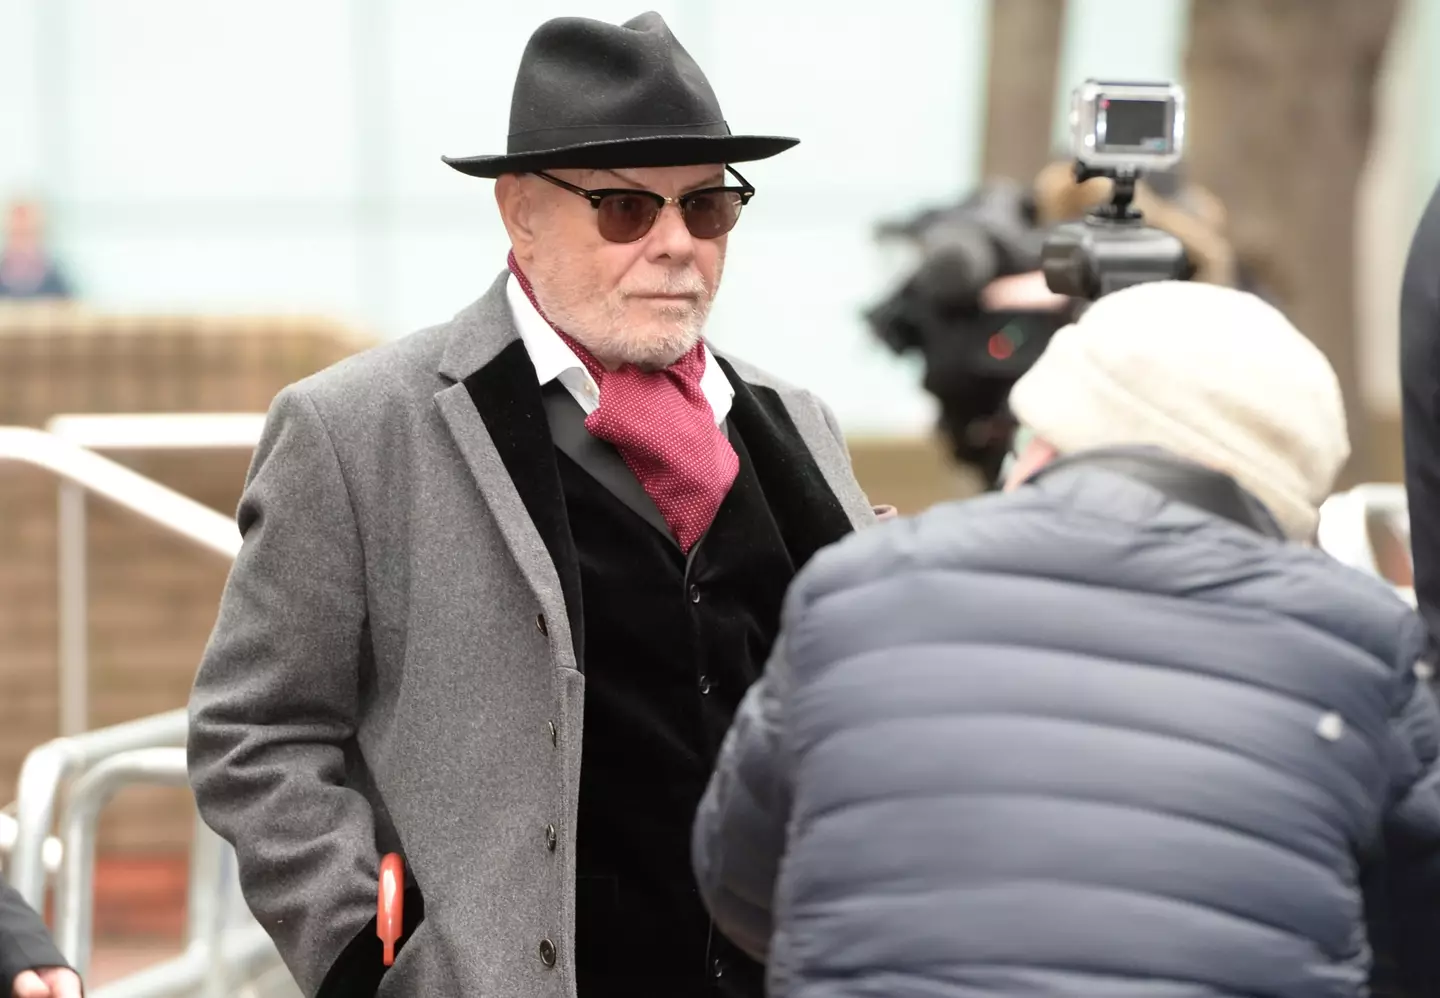 Gary Glitter was caught on camera asking how to access the Dark Web.